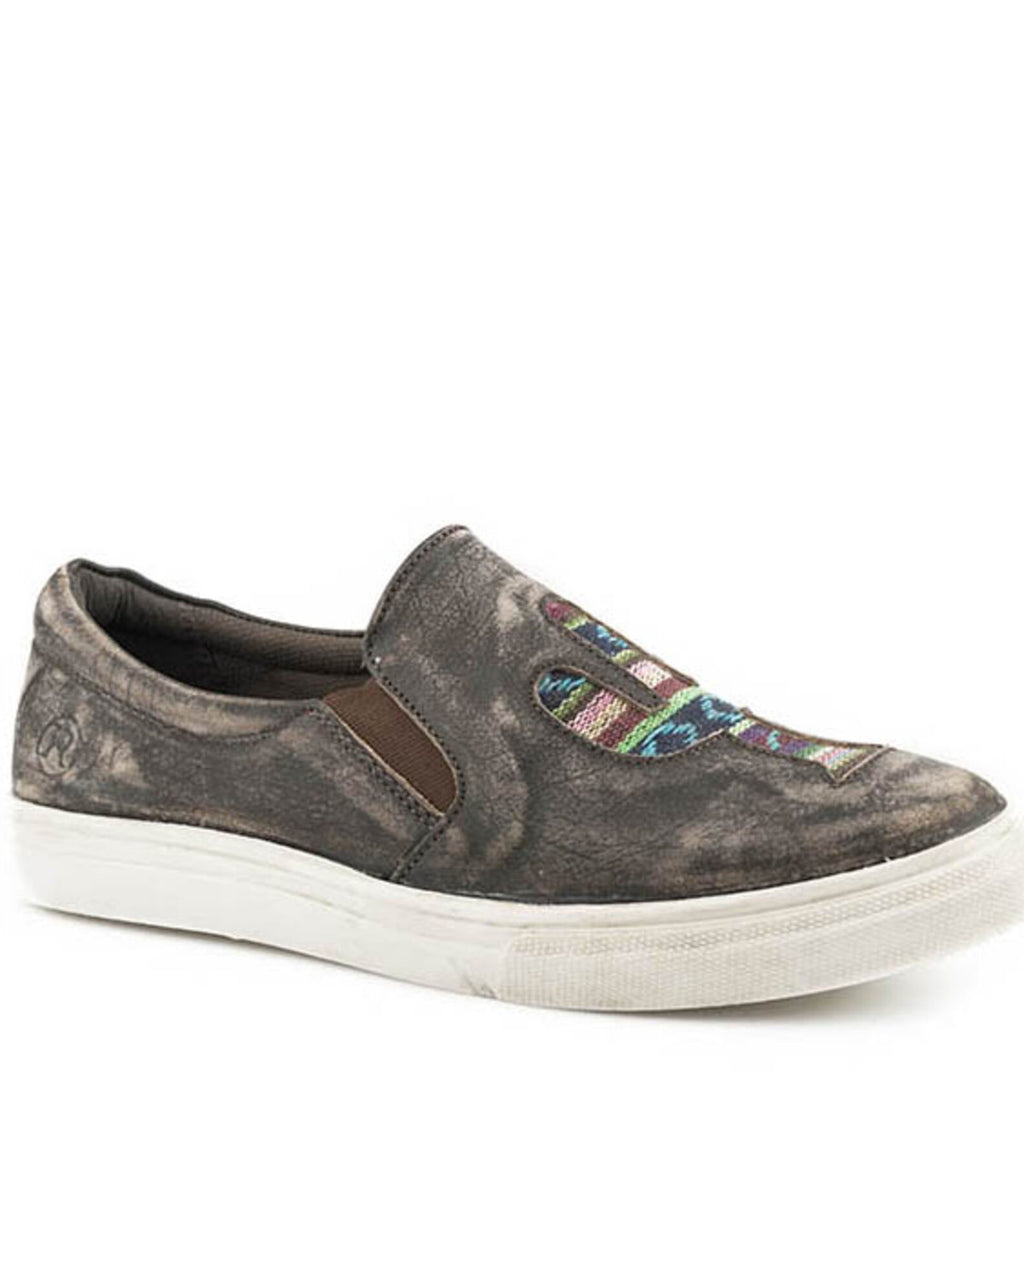 Roper Casual Shoes Womens Mane Cactus Sanded Brown